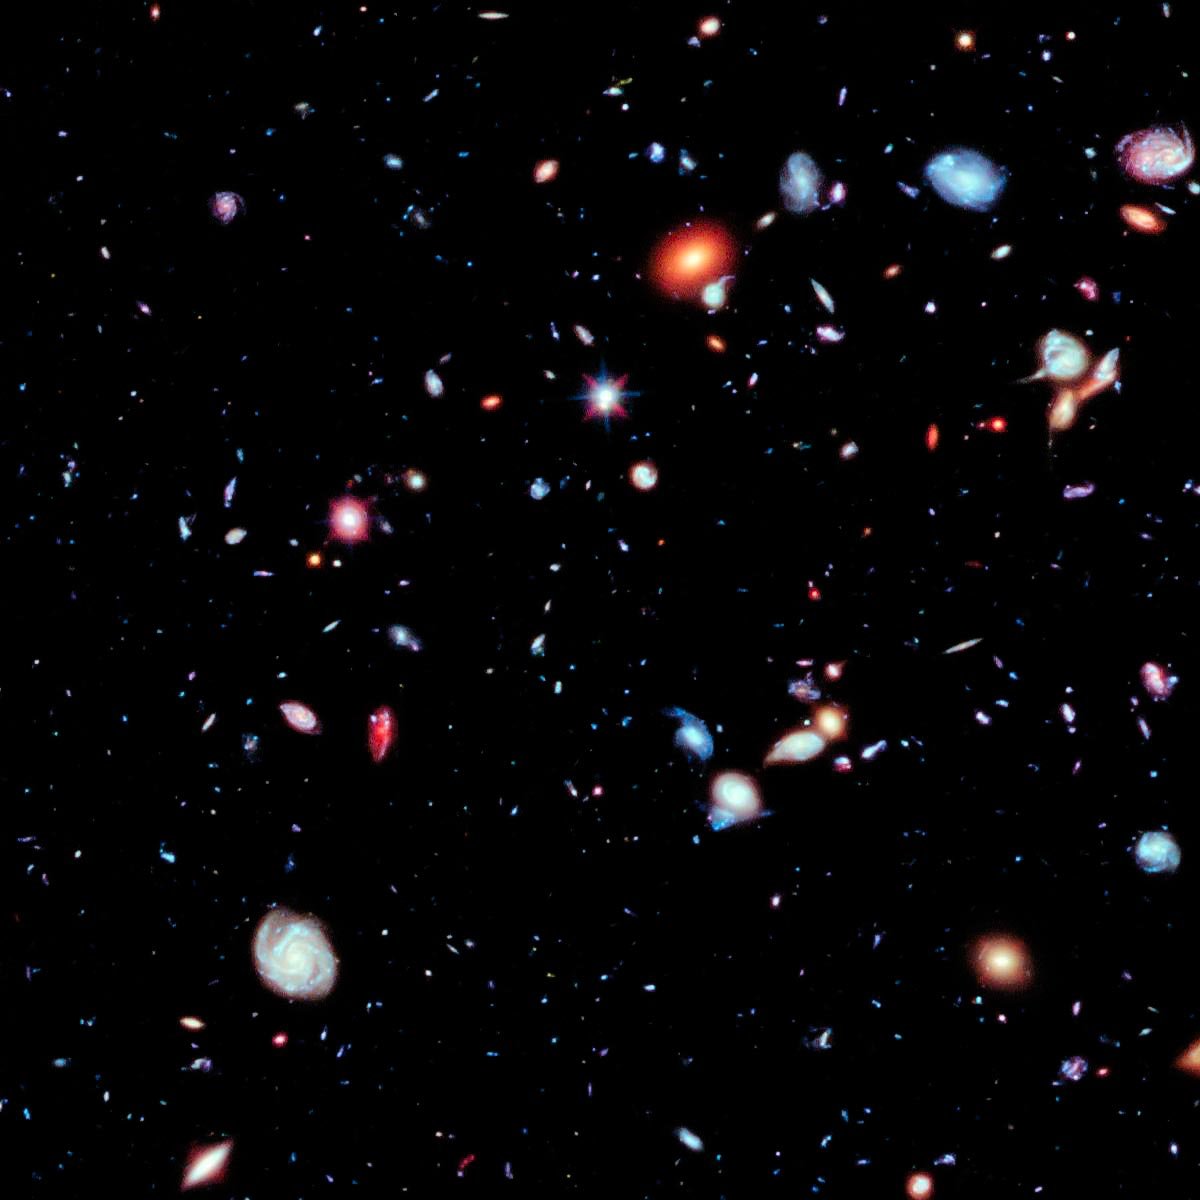 Image of Our Universe by NASA